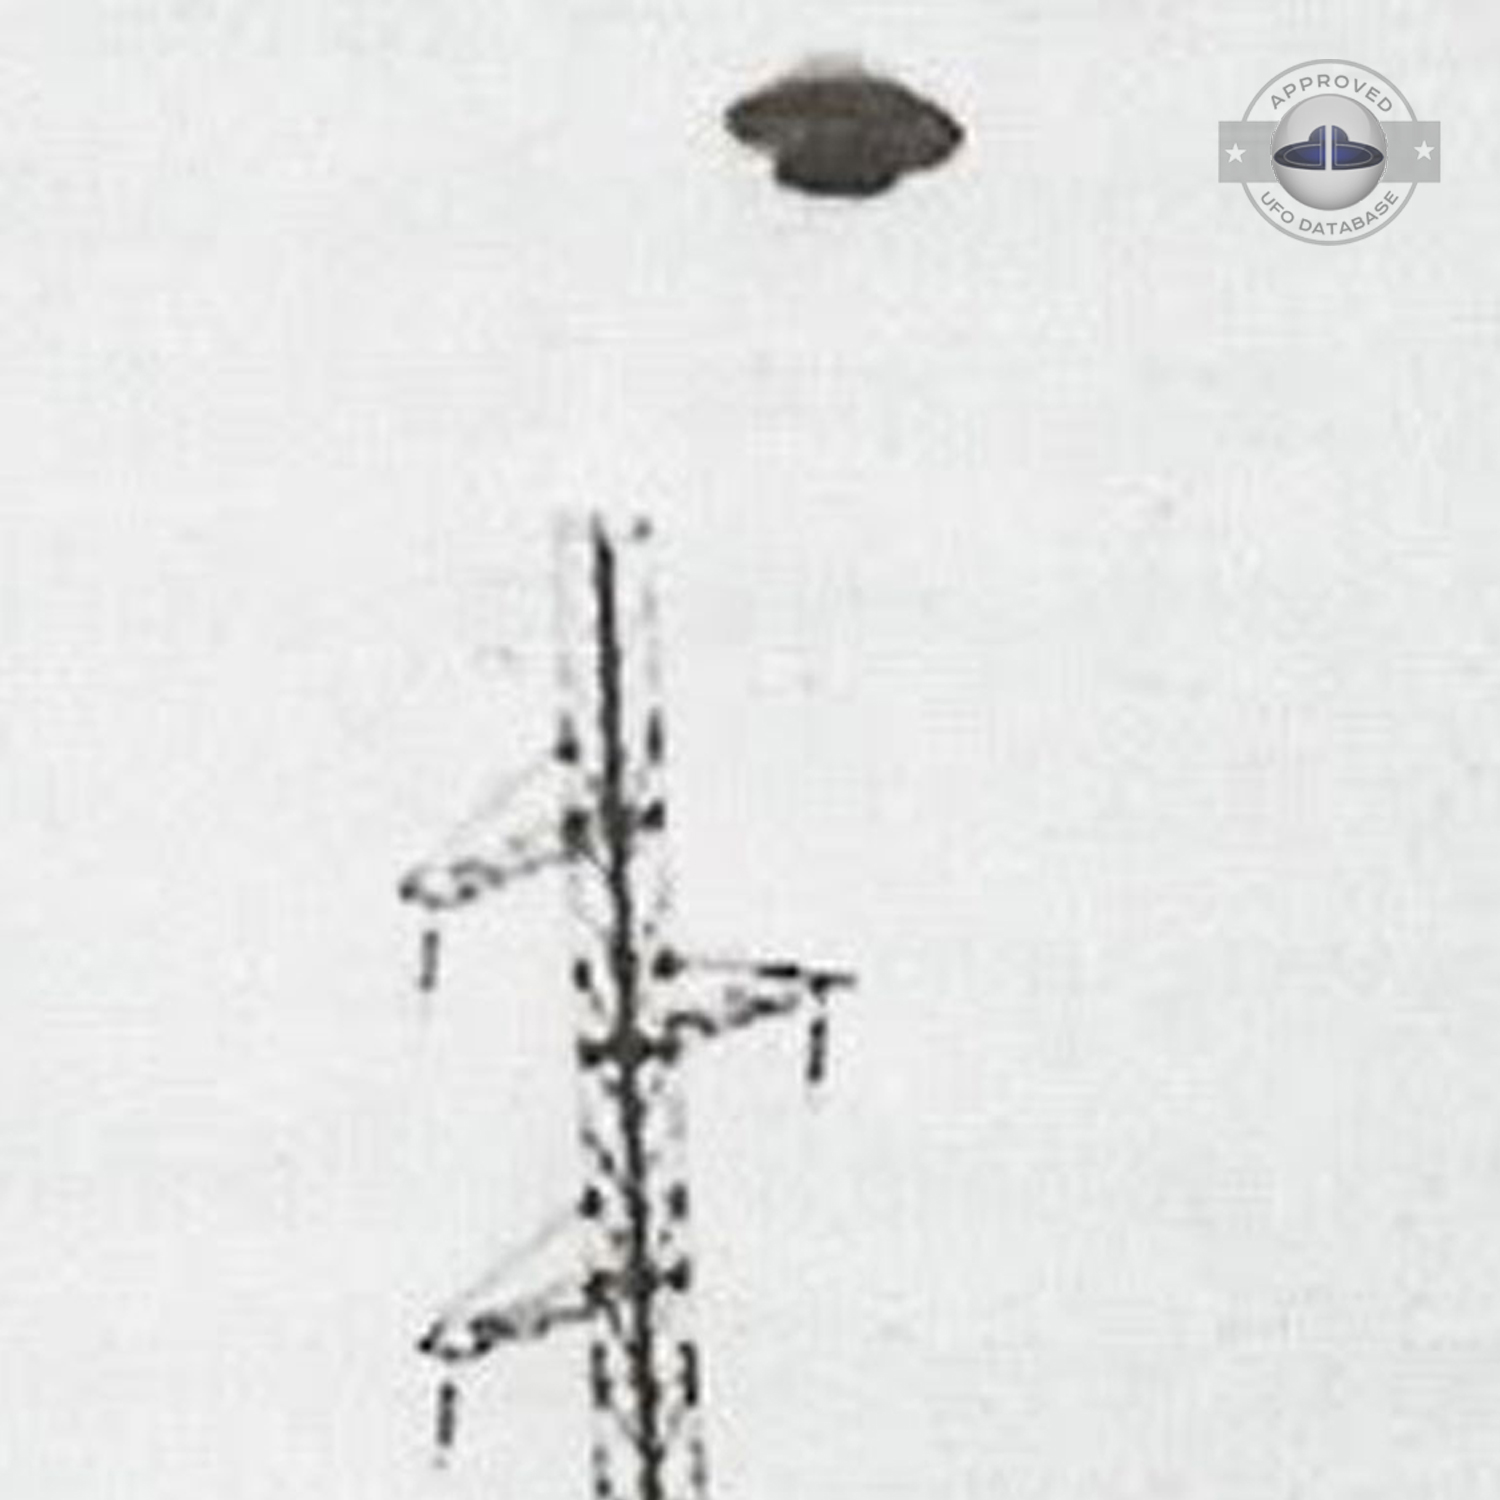 UFO muffin shape flying saucer standing over electrical stucture UFO Picture #46-3